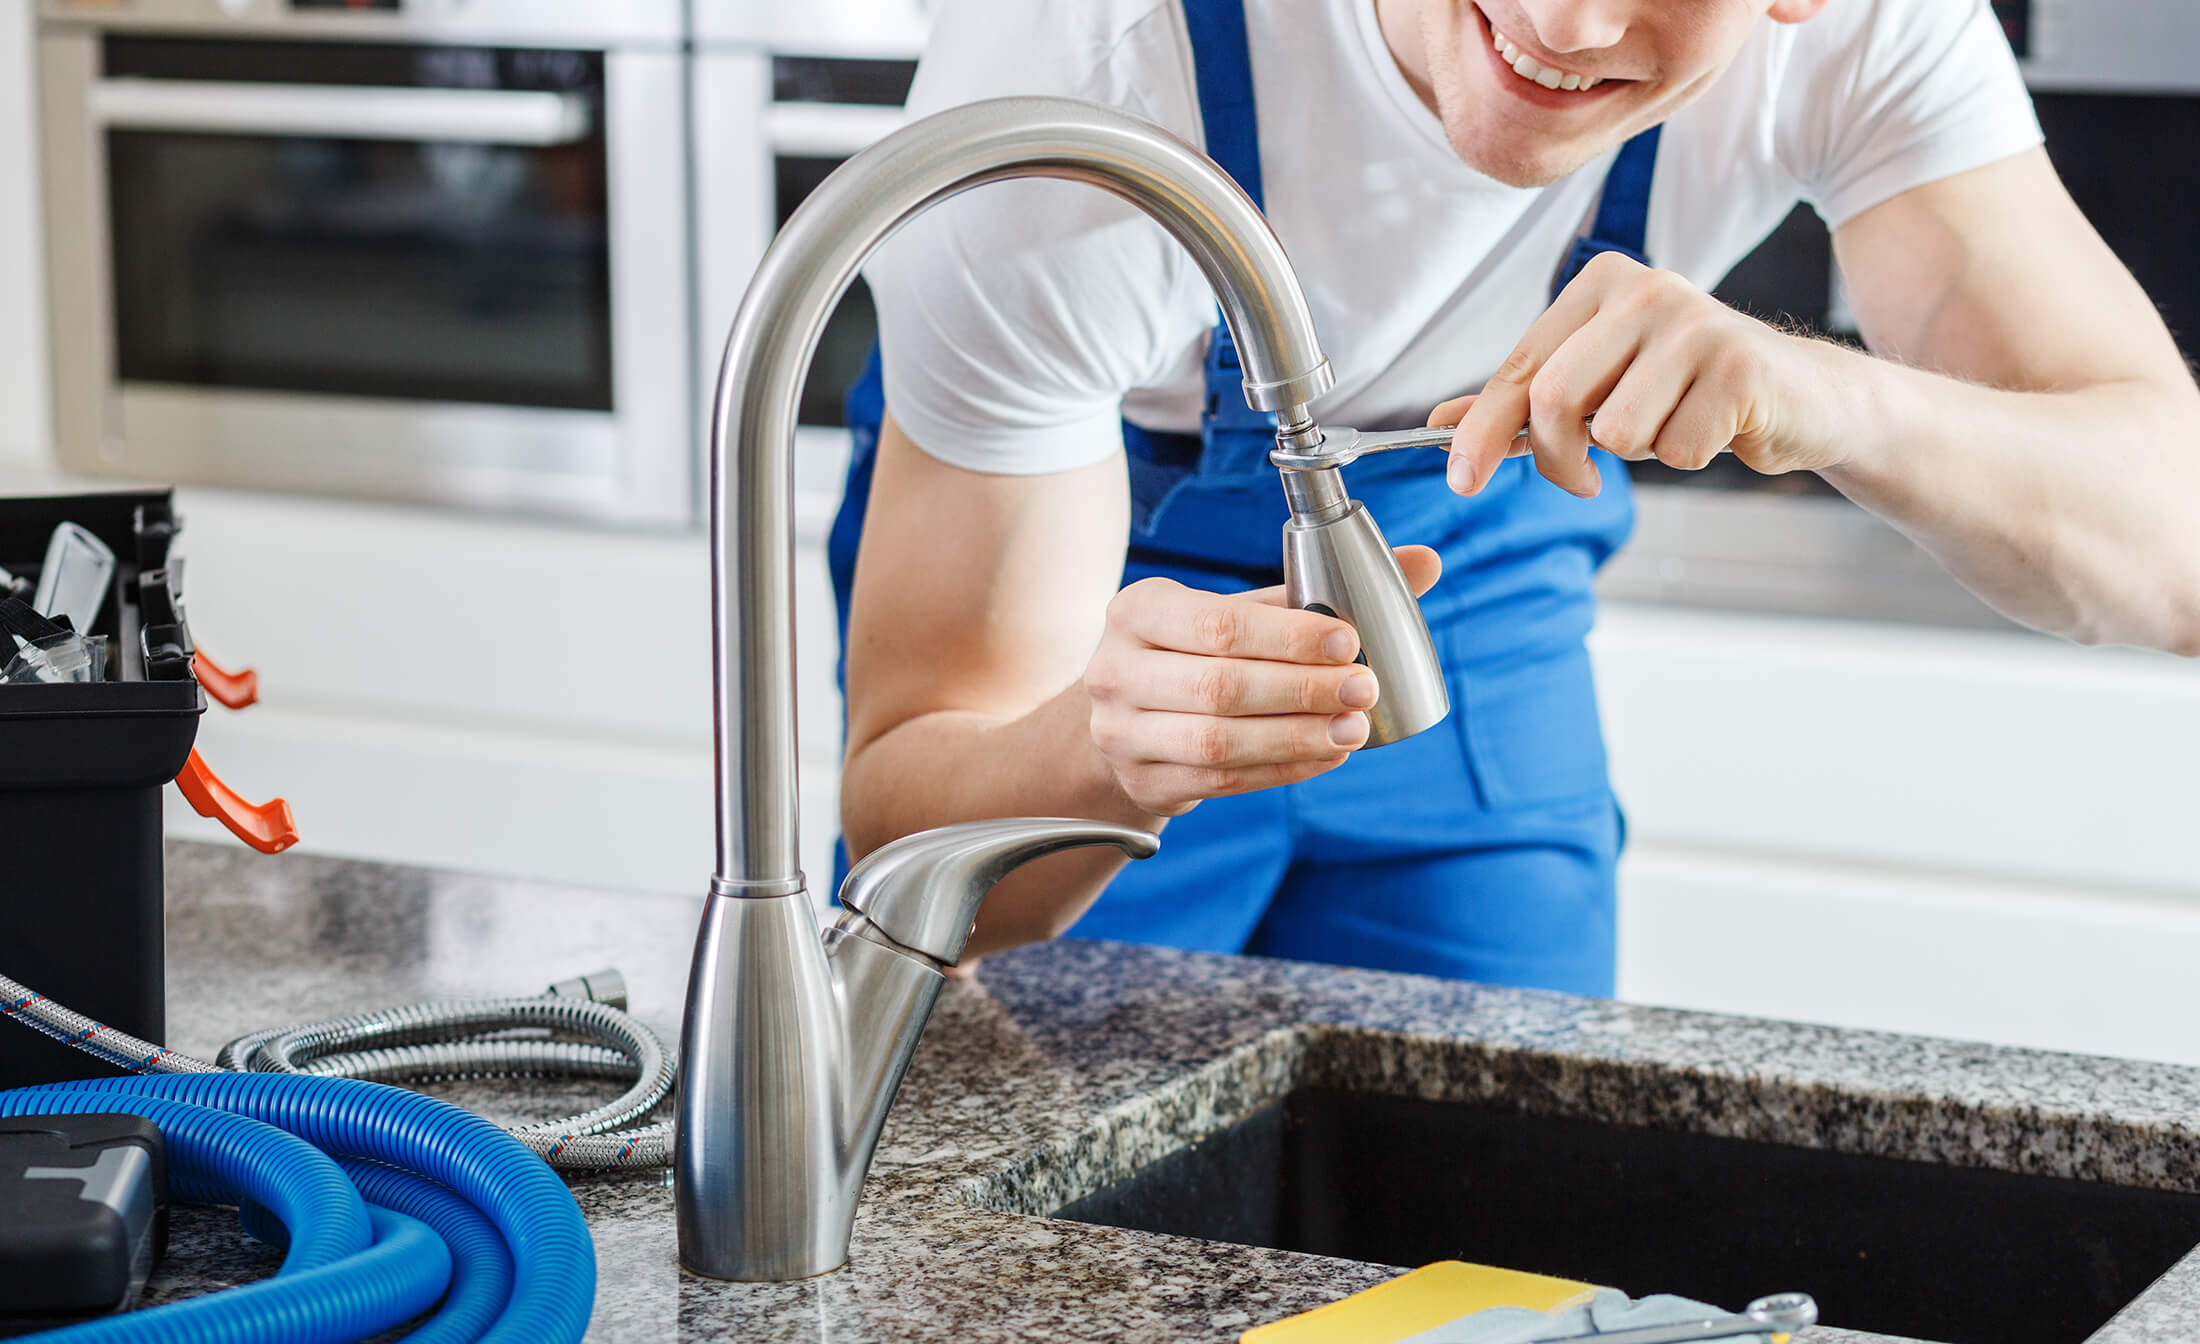 How to Replace a Faucet